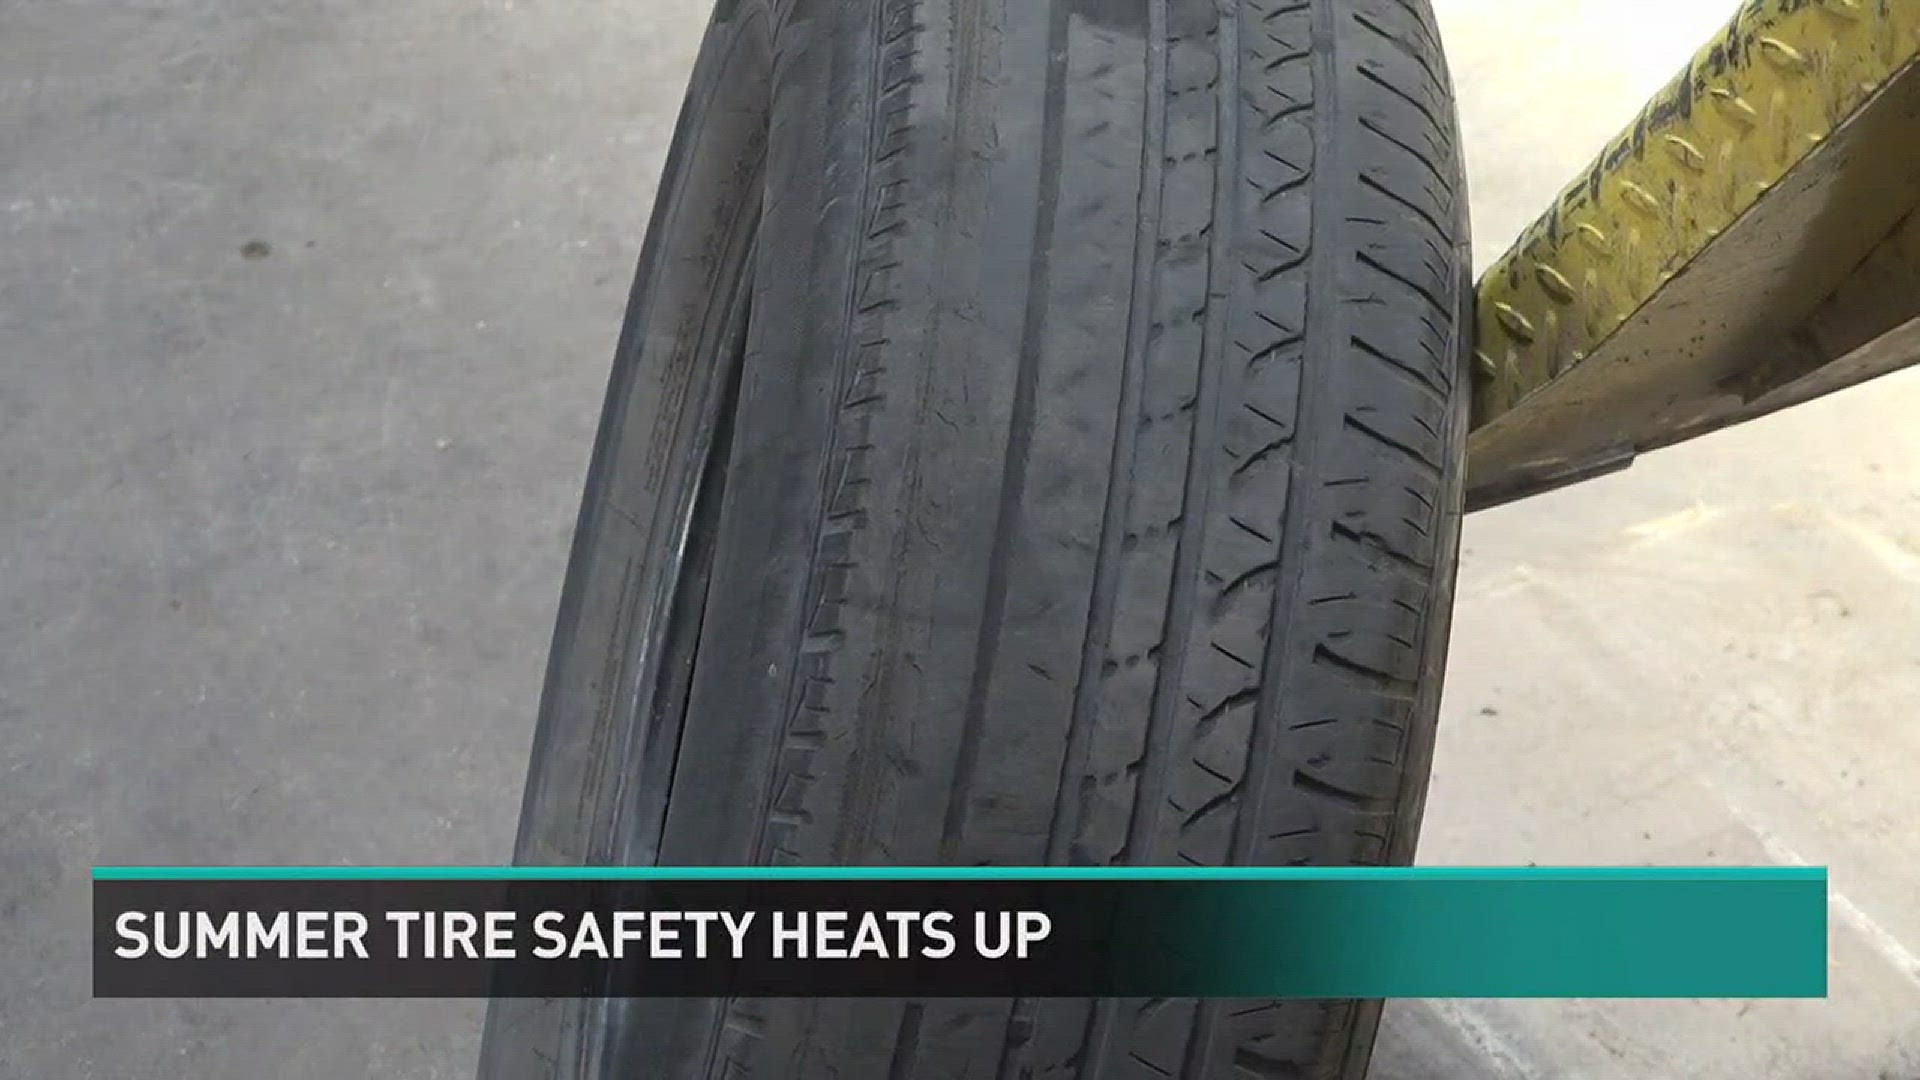 Tips on tire safety as the temperatures heat up.